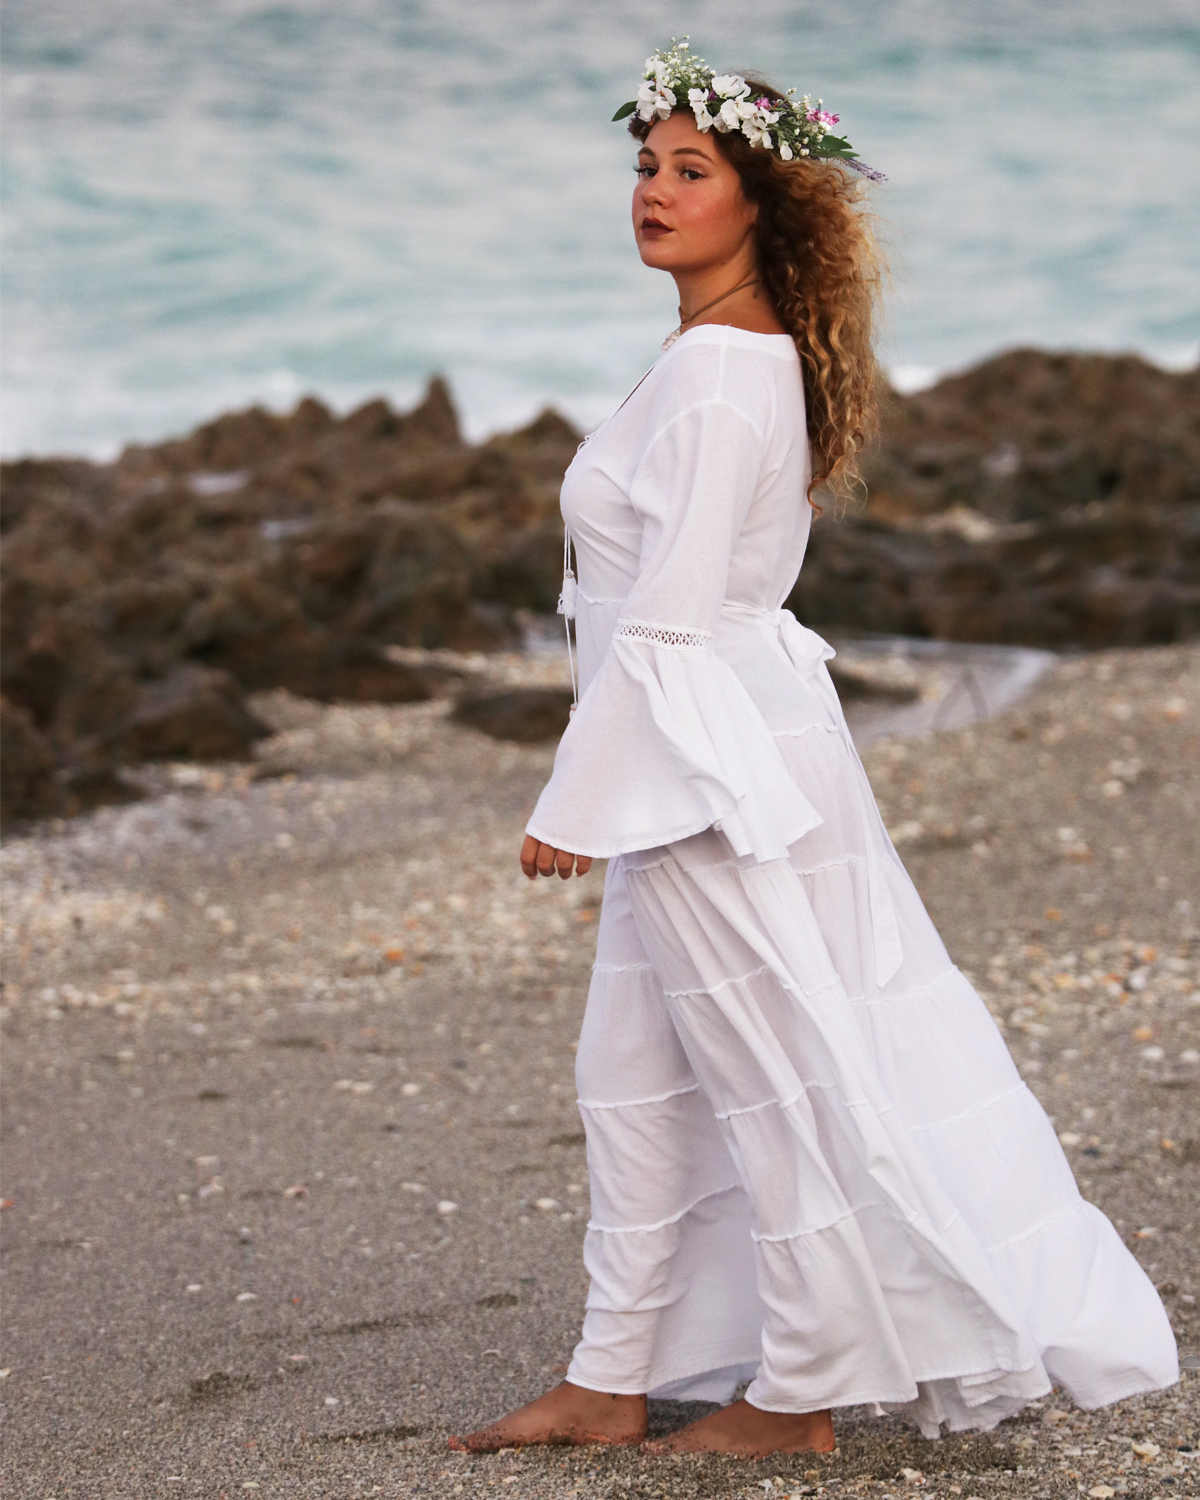 Long Boho White Sundress-Billowing Breeze-side view – Model at the beach